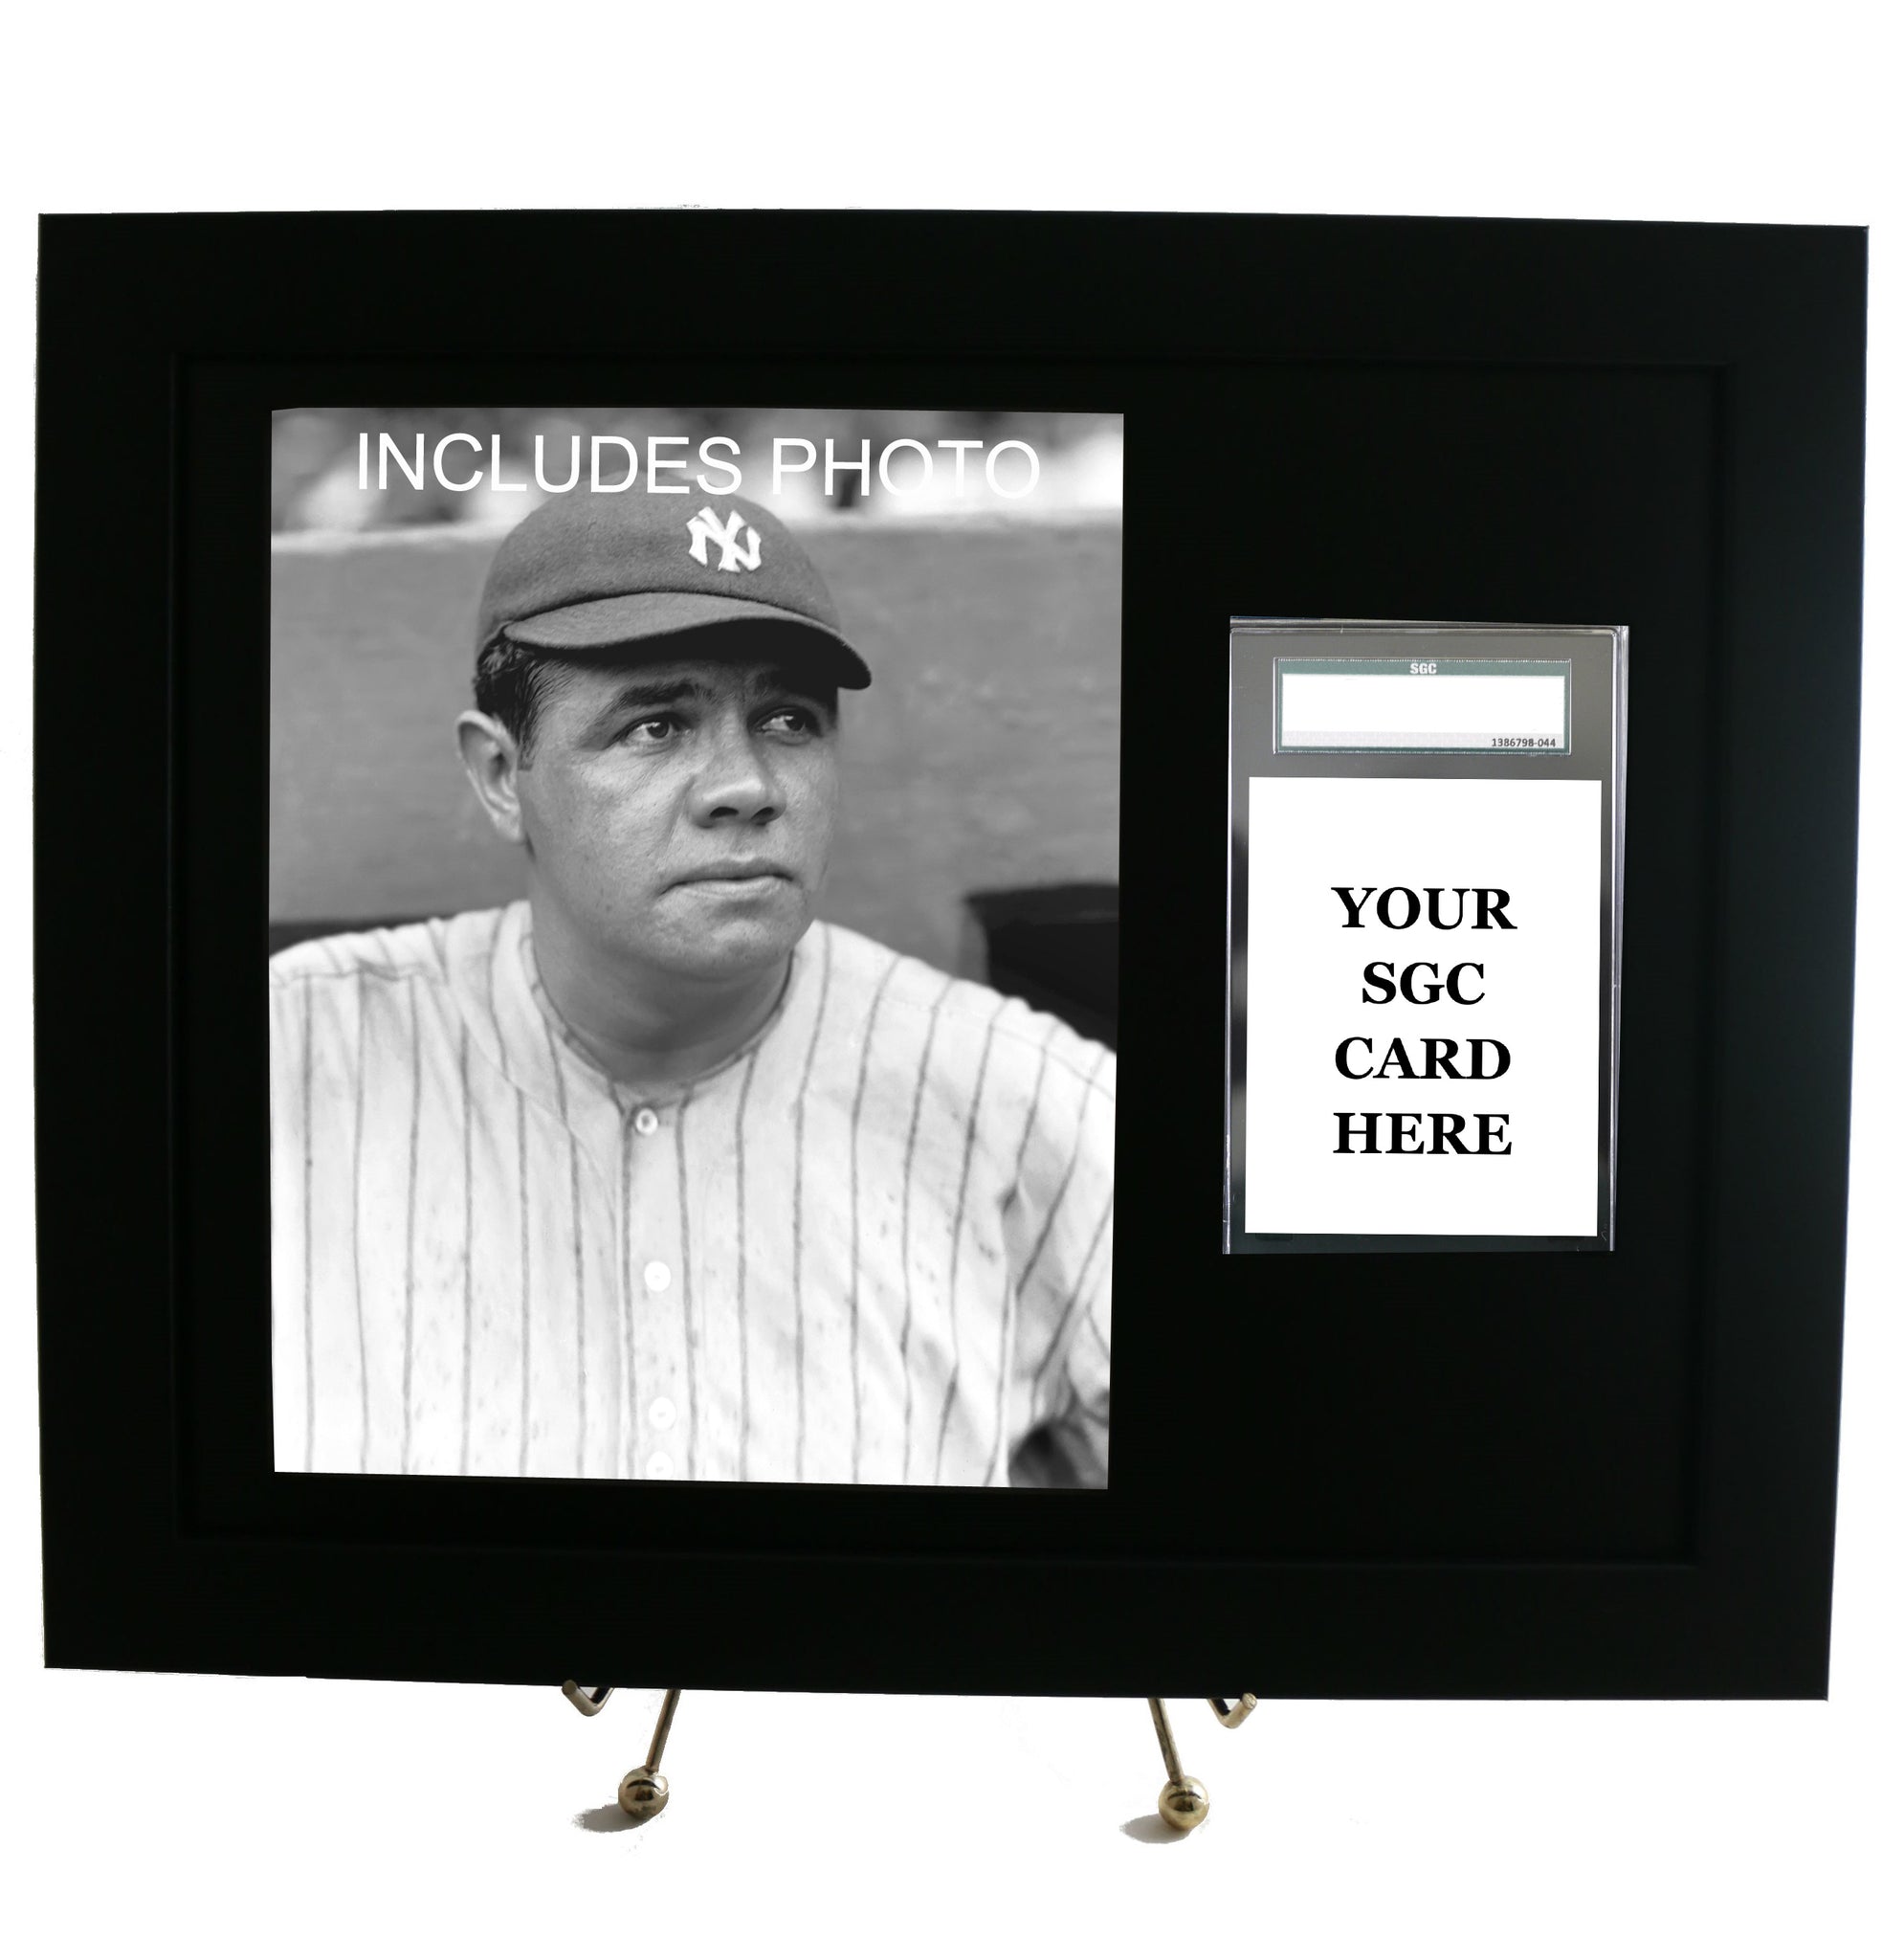 Graded Sports Card Frame for YOUR SGC Babe Ruth Card (INCLUDES PHOTO) - Graded And Framed